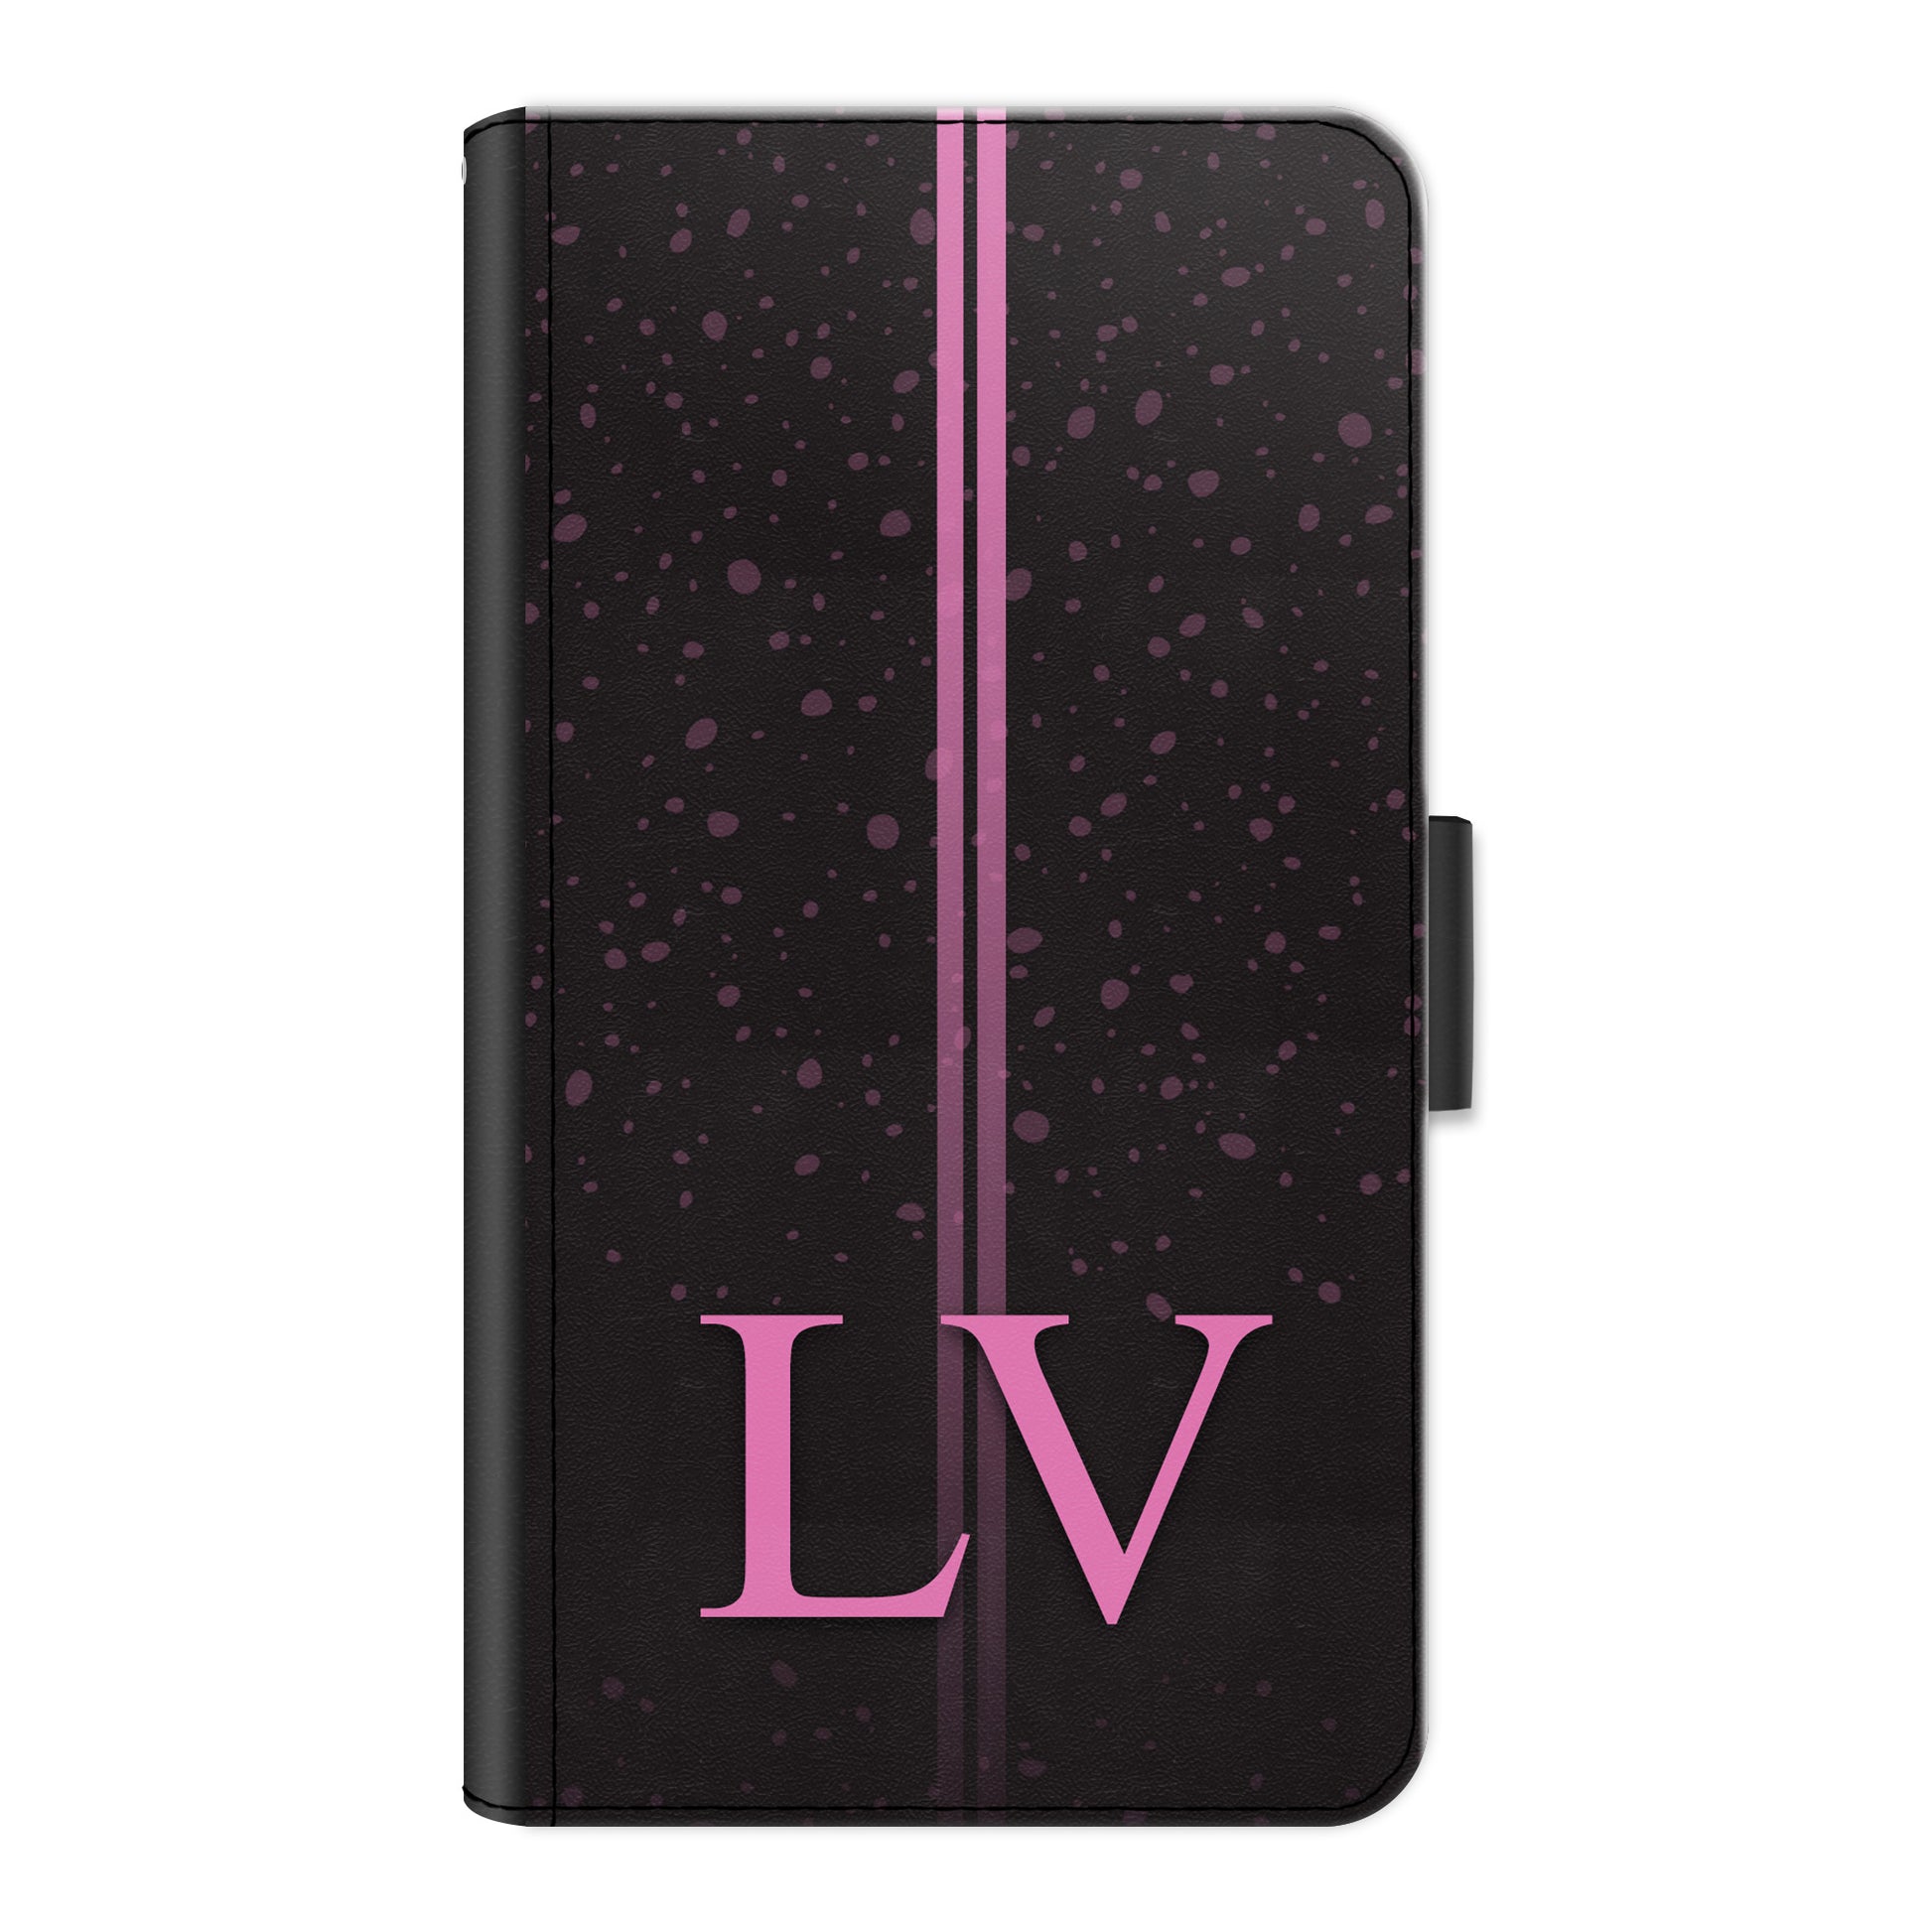 Personalised One Phone Leather Wallet with Pink Initials, Pin Stripes and Droplets on Black